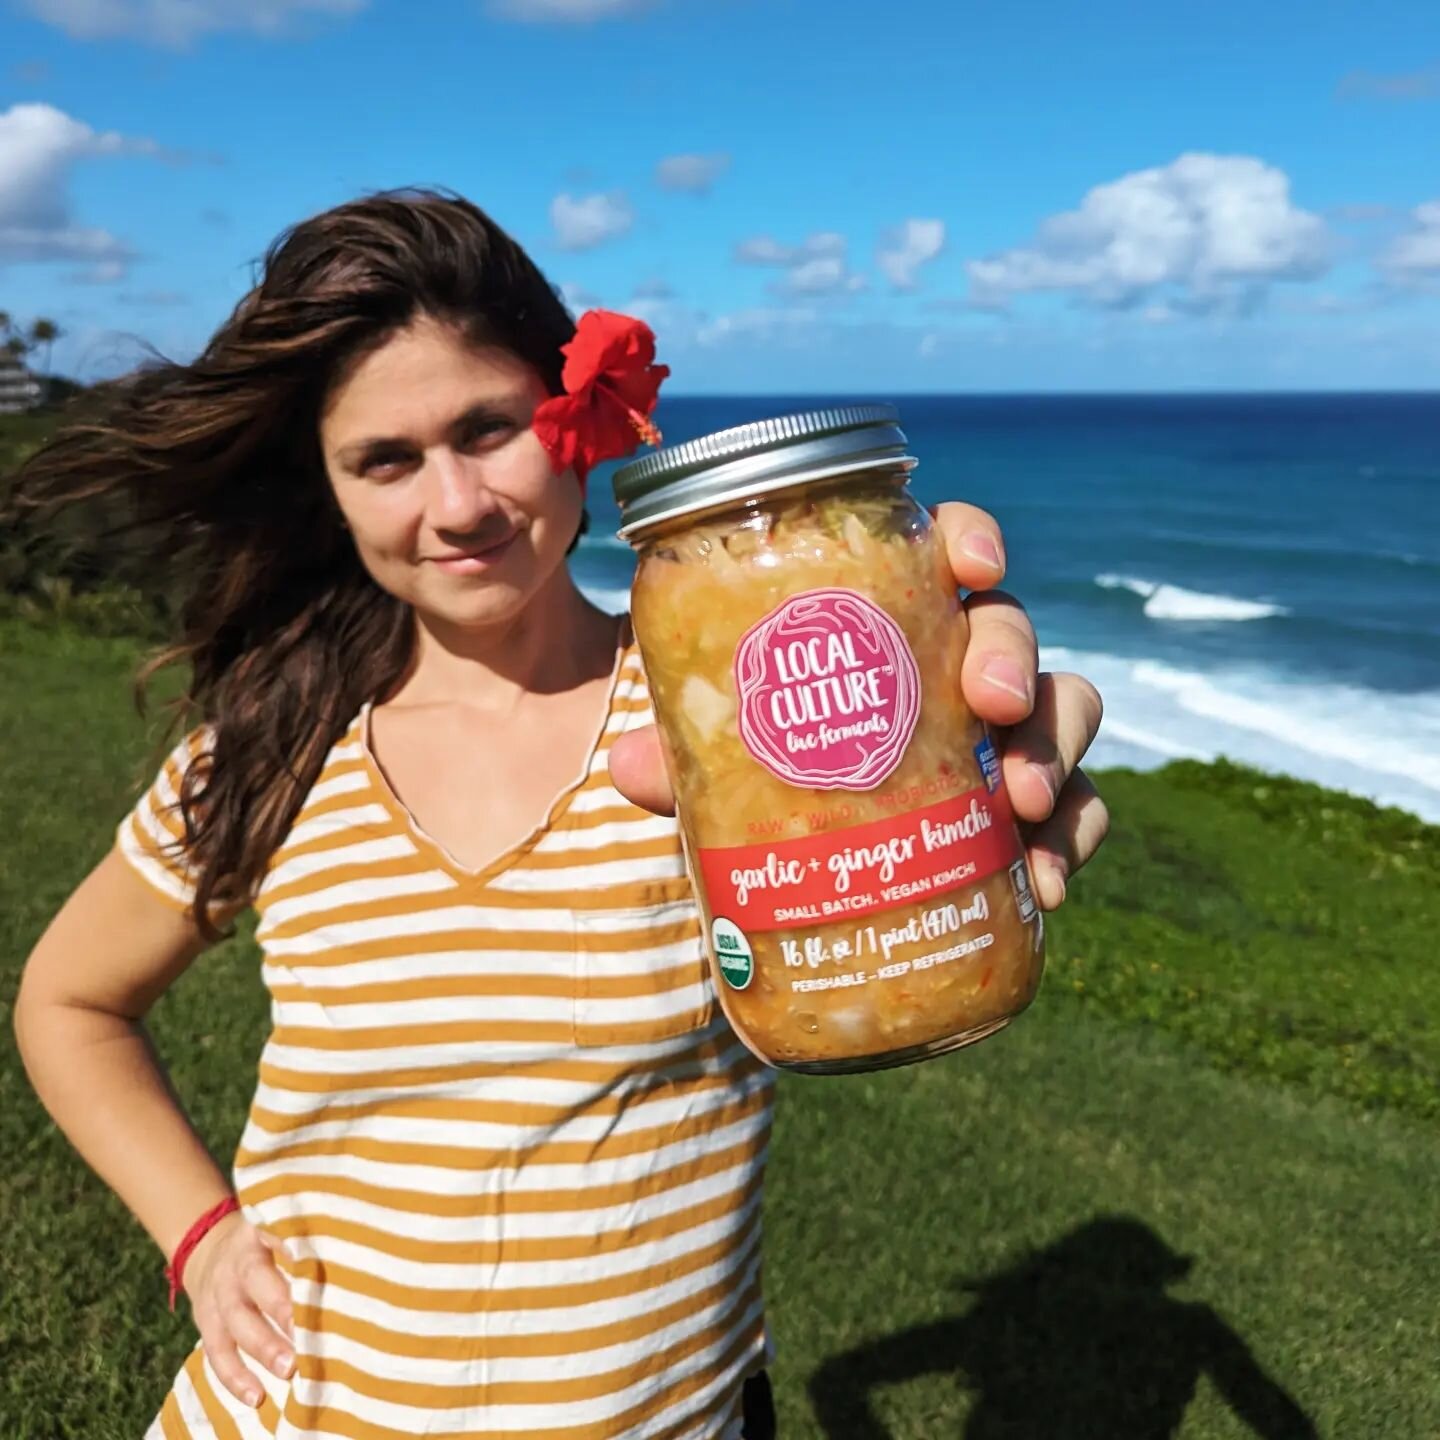 👉🏽 You can now find us at all Down To Earth locations in Oahu and Maui 🌺 Bringing the Aloha to the ferment realm 🌺 Mahalo Nui for the support @downtoearthhi 🤙🏽